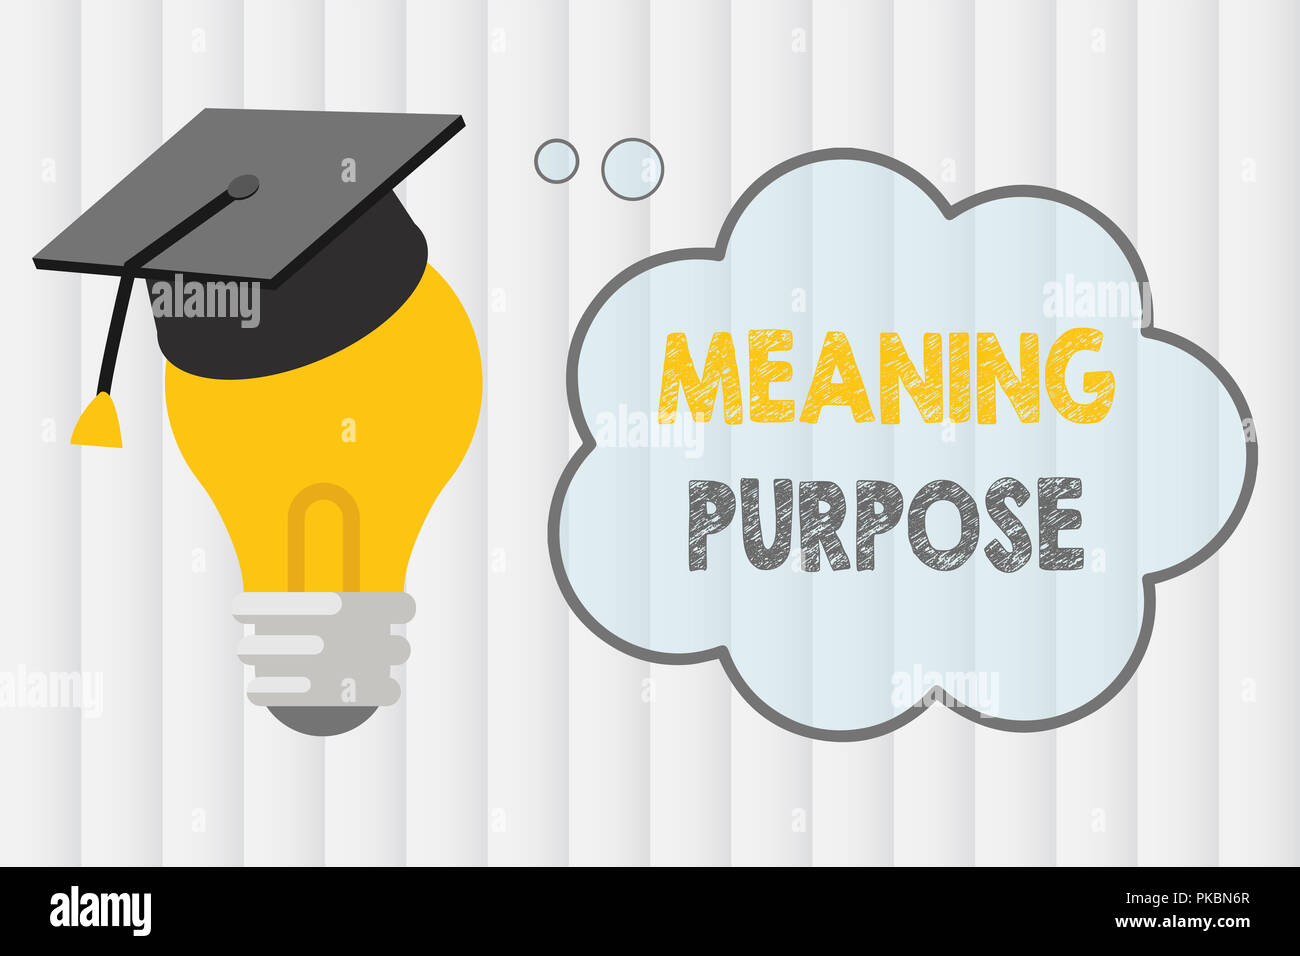 Text sign showing Meaning Purpose. Conceptual photo The reason for which something is done or created and exists. Stock Photo